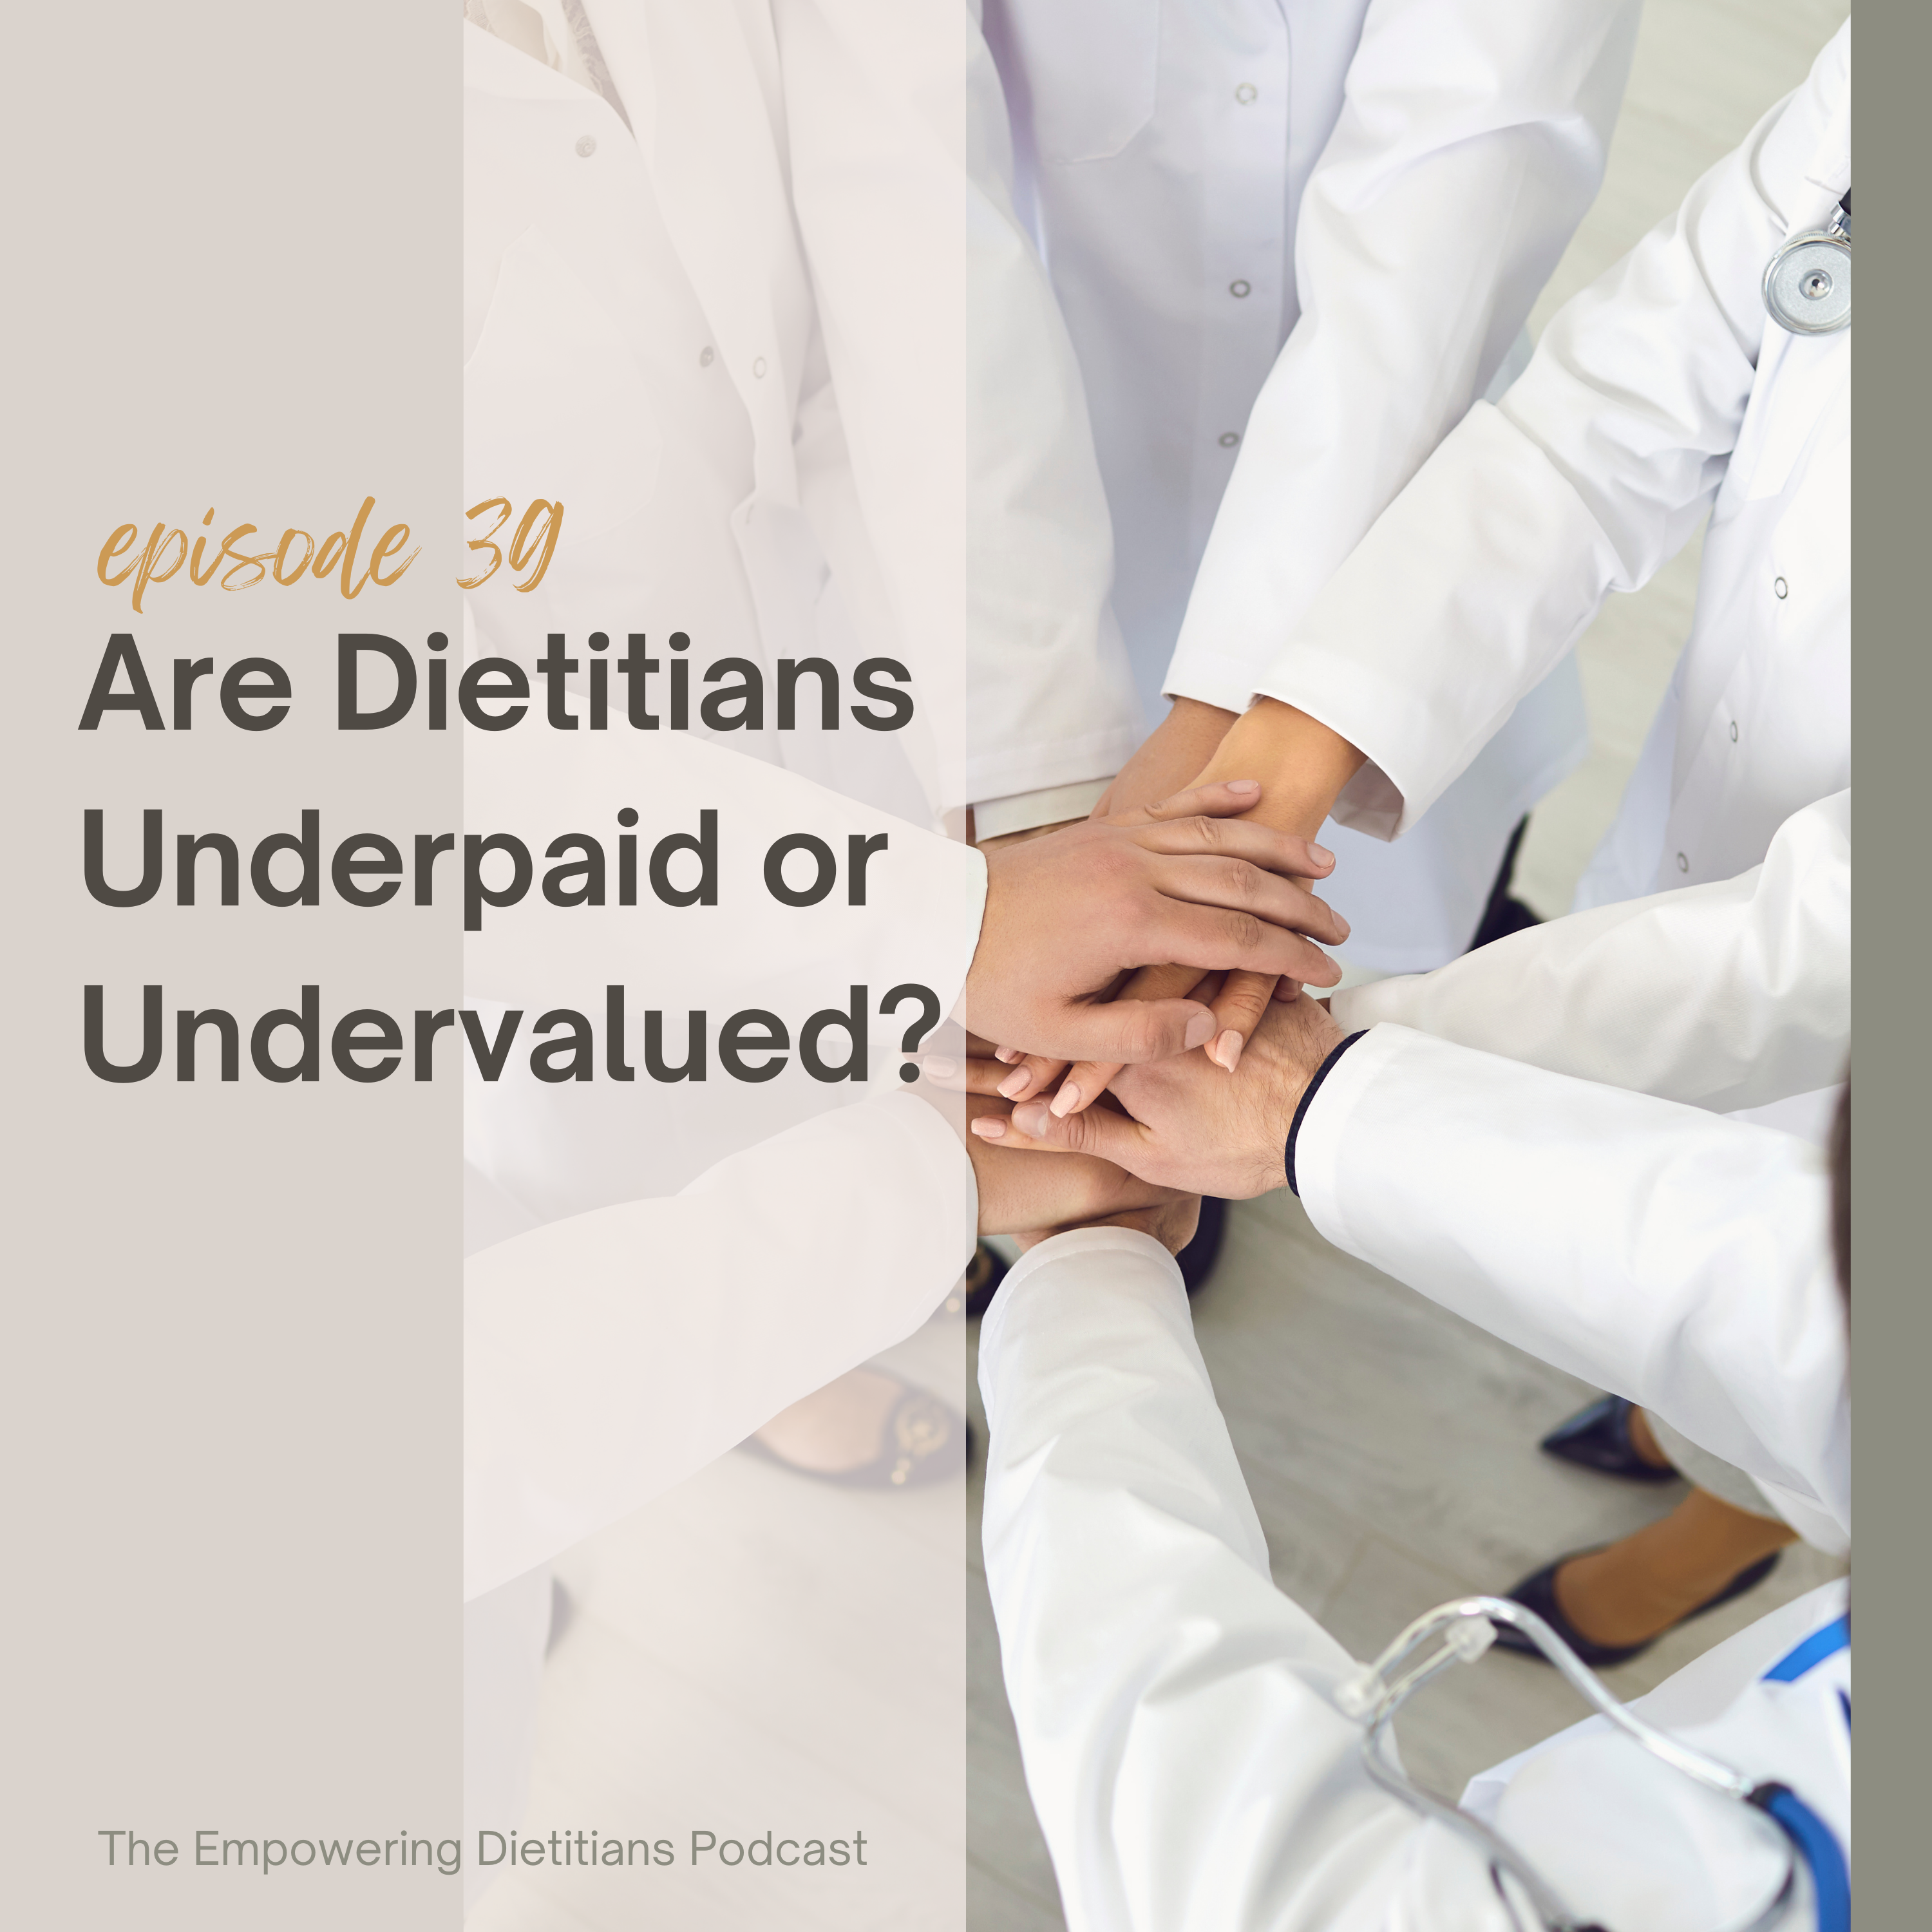 are dietitians underpaid undervalued or both?